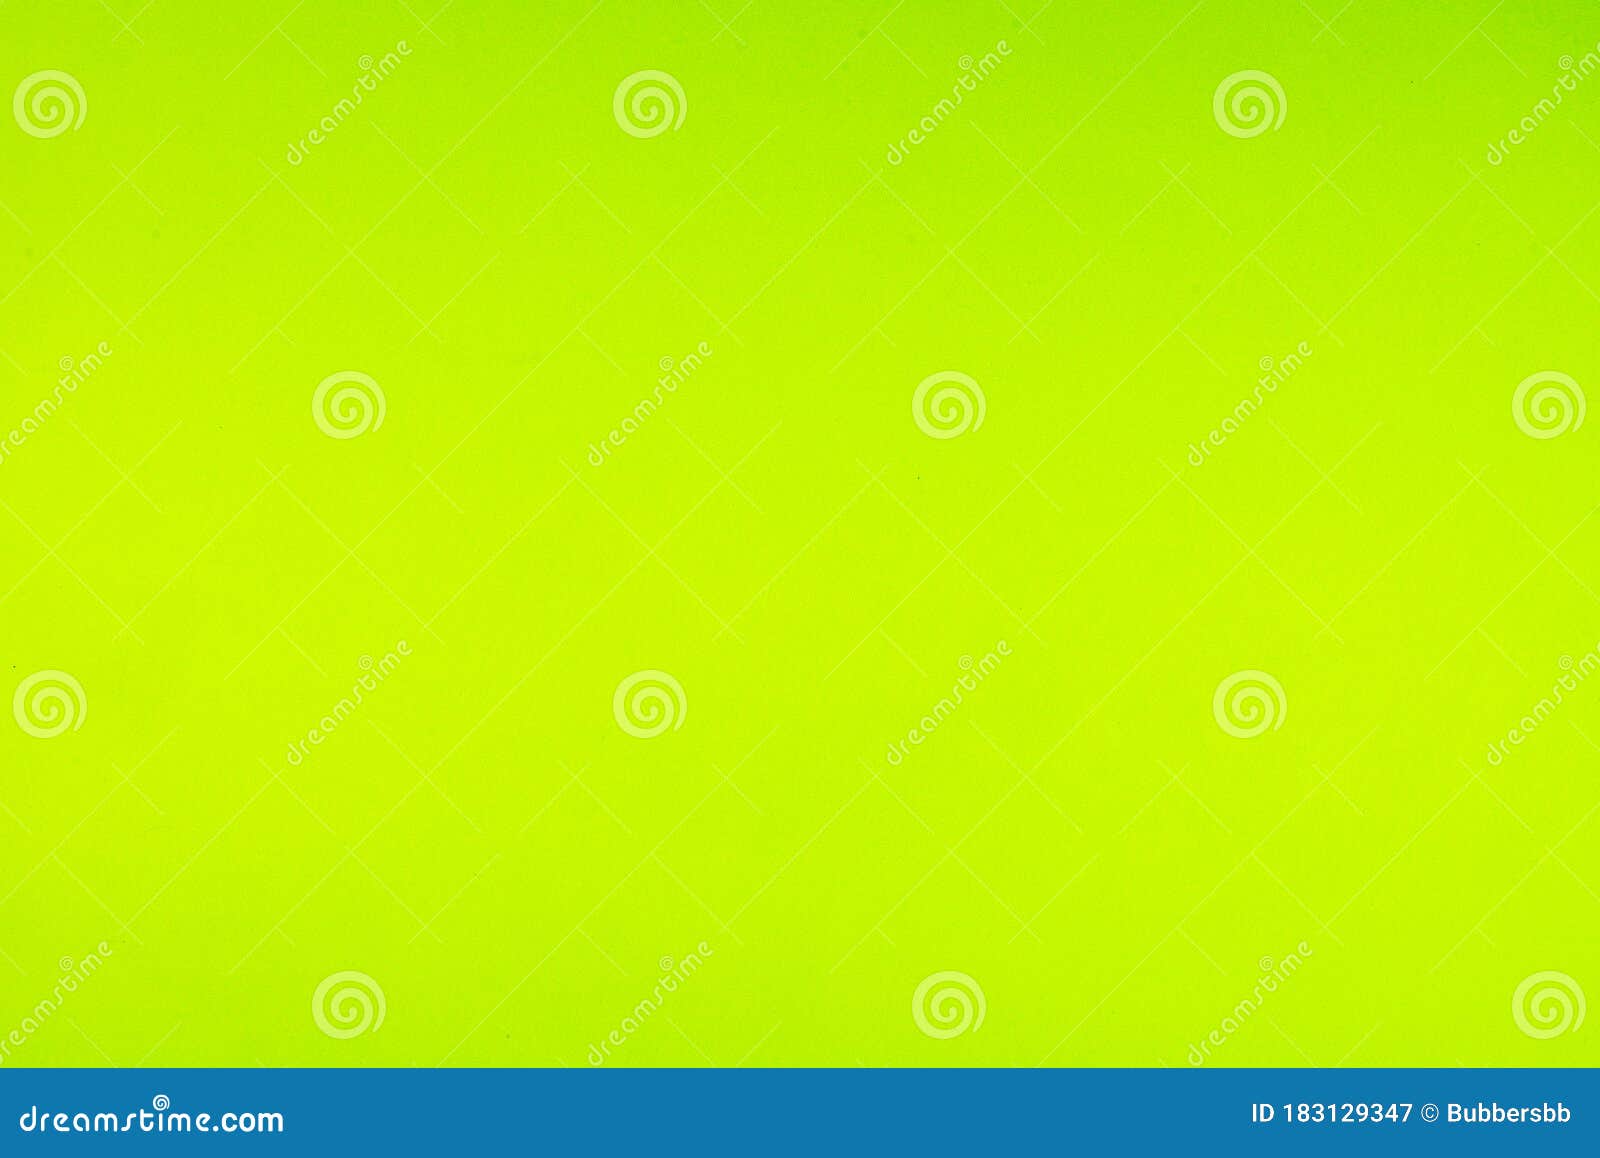 Green Plain Simple Gradient Background Stock Image  Image of wallpaper  layers 153962507